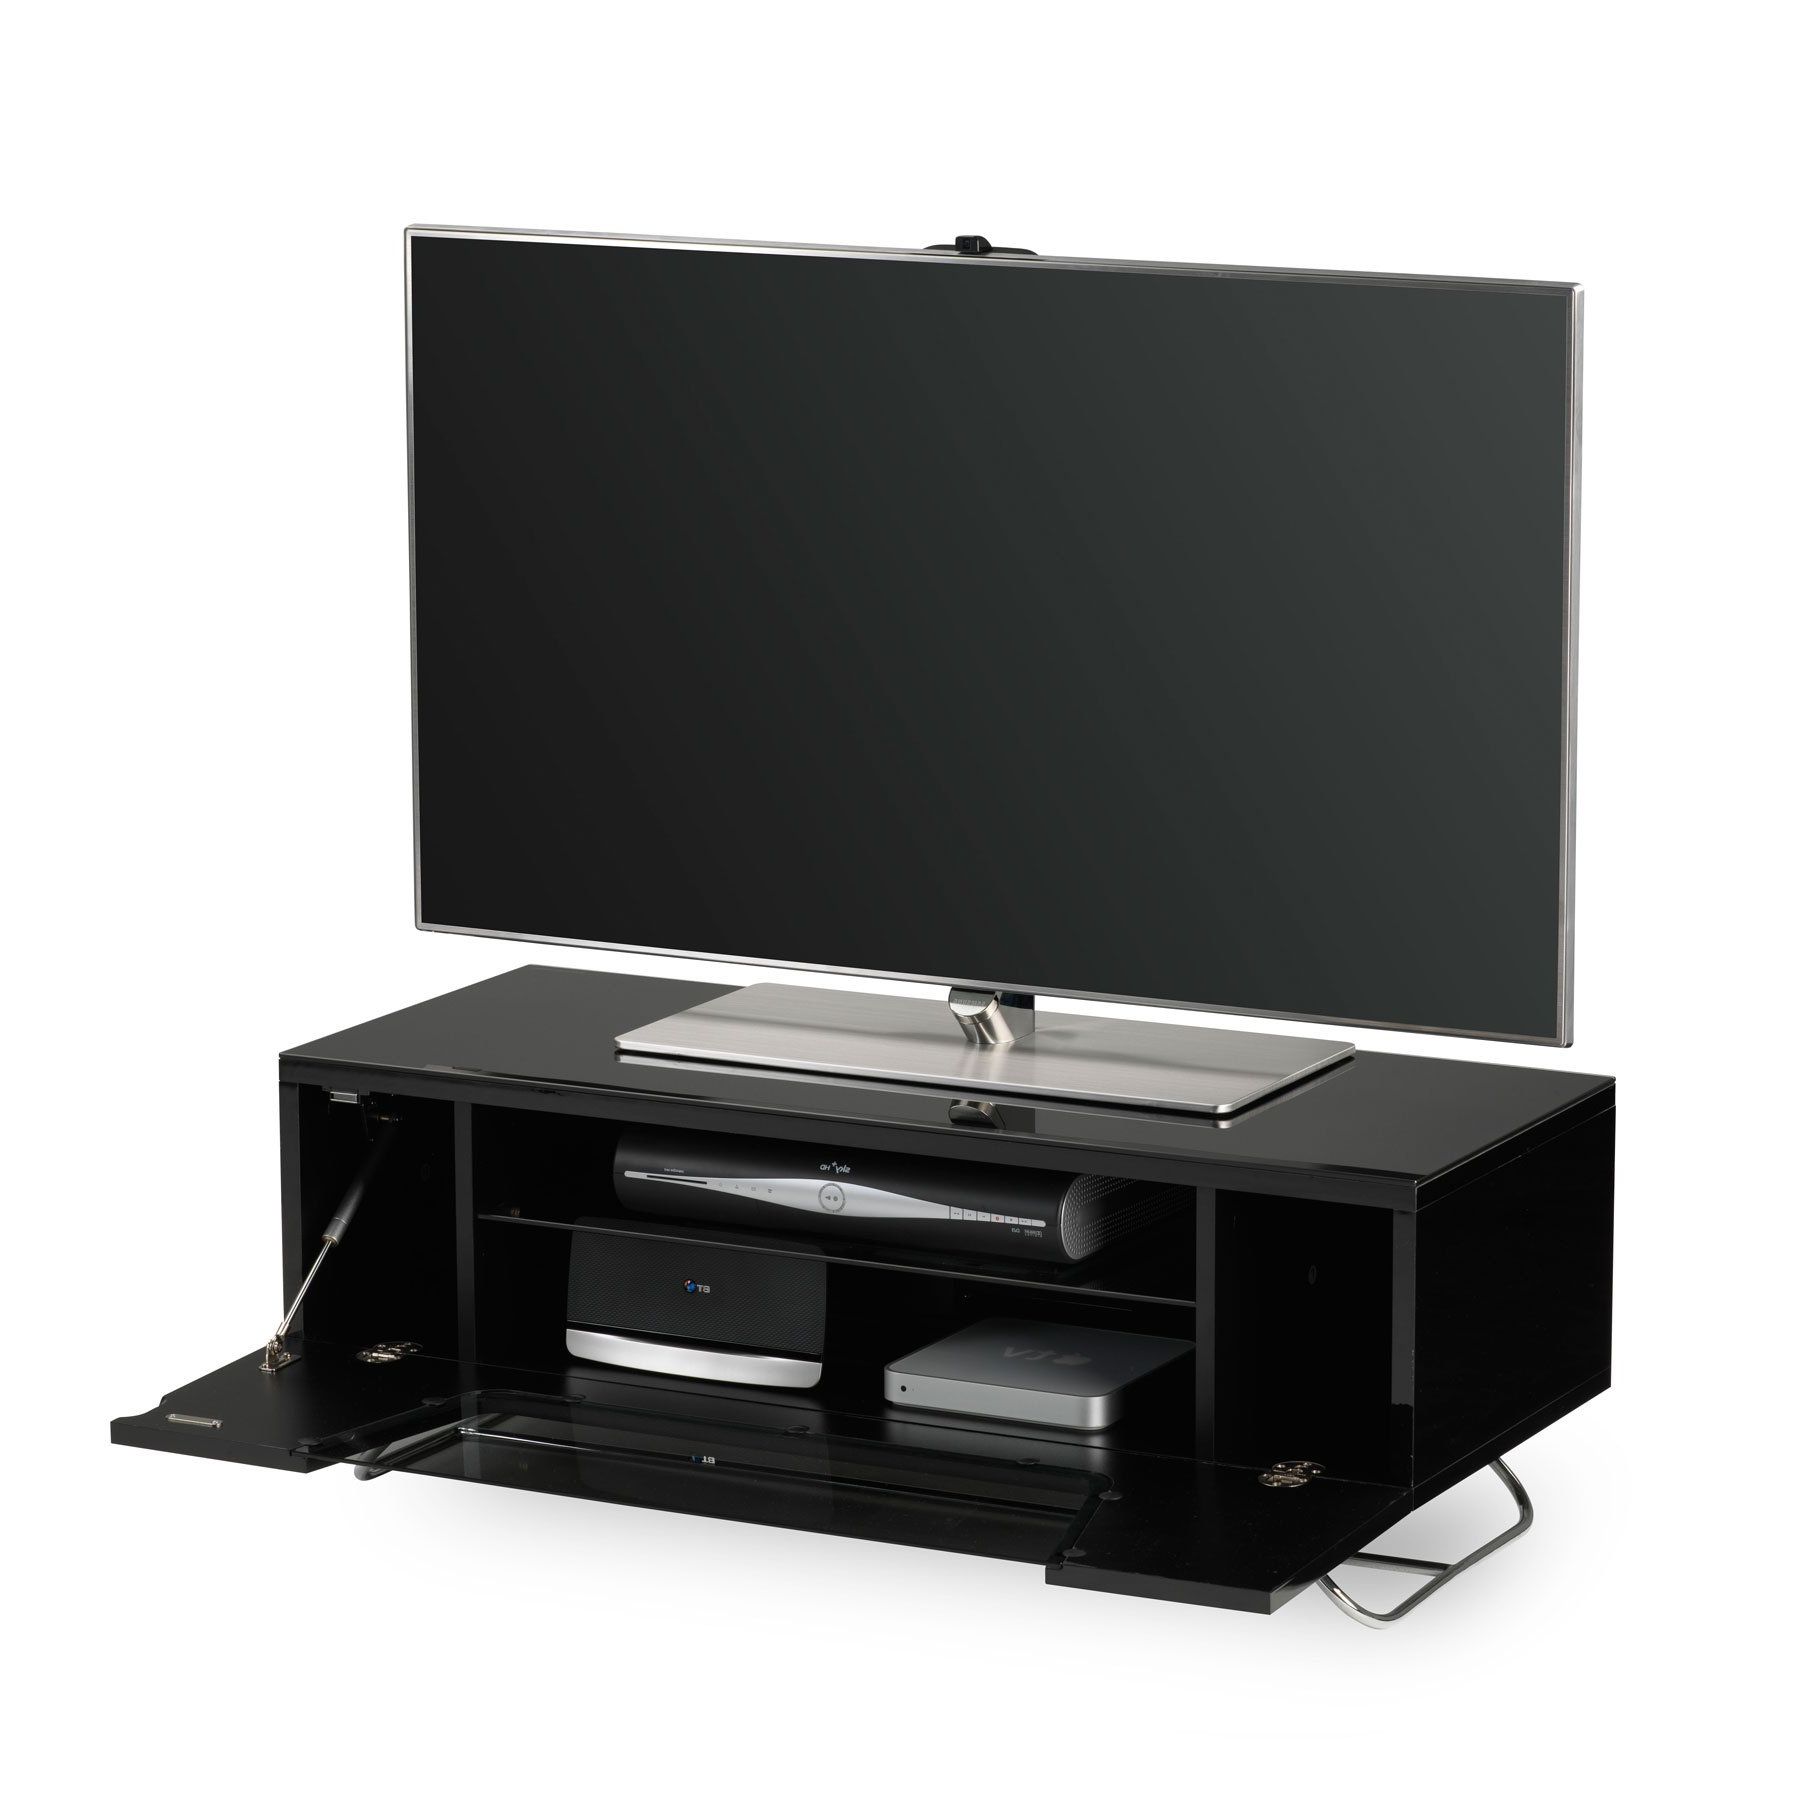 Alphason Chromium 2 100cm Black Tv Stand For Up To 50" Tvs Intended For Caleah Tv Stands For Tvs Up To 50&quot; (View 12 of 20)